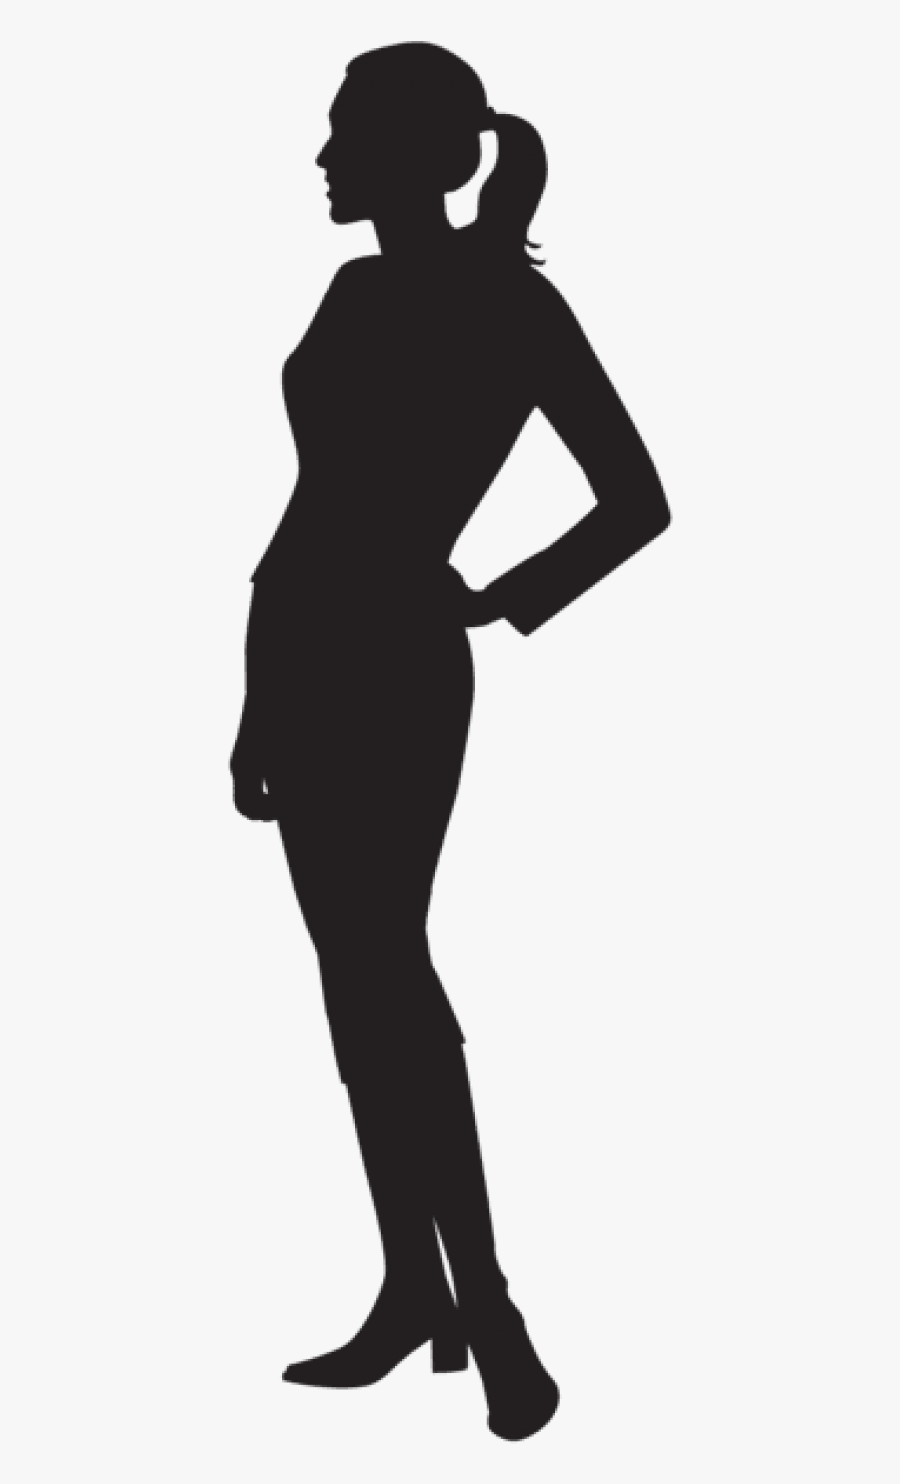 Free Female Silhouette Images - Woman Silhouette Side View Png, Transparent Clipart